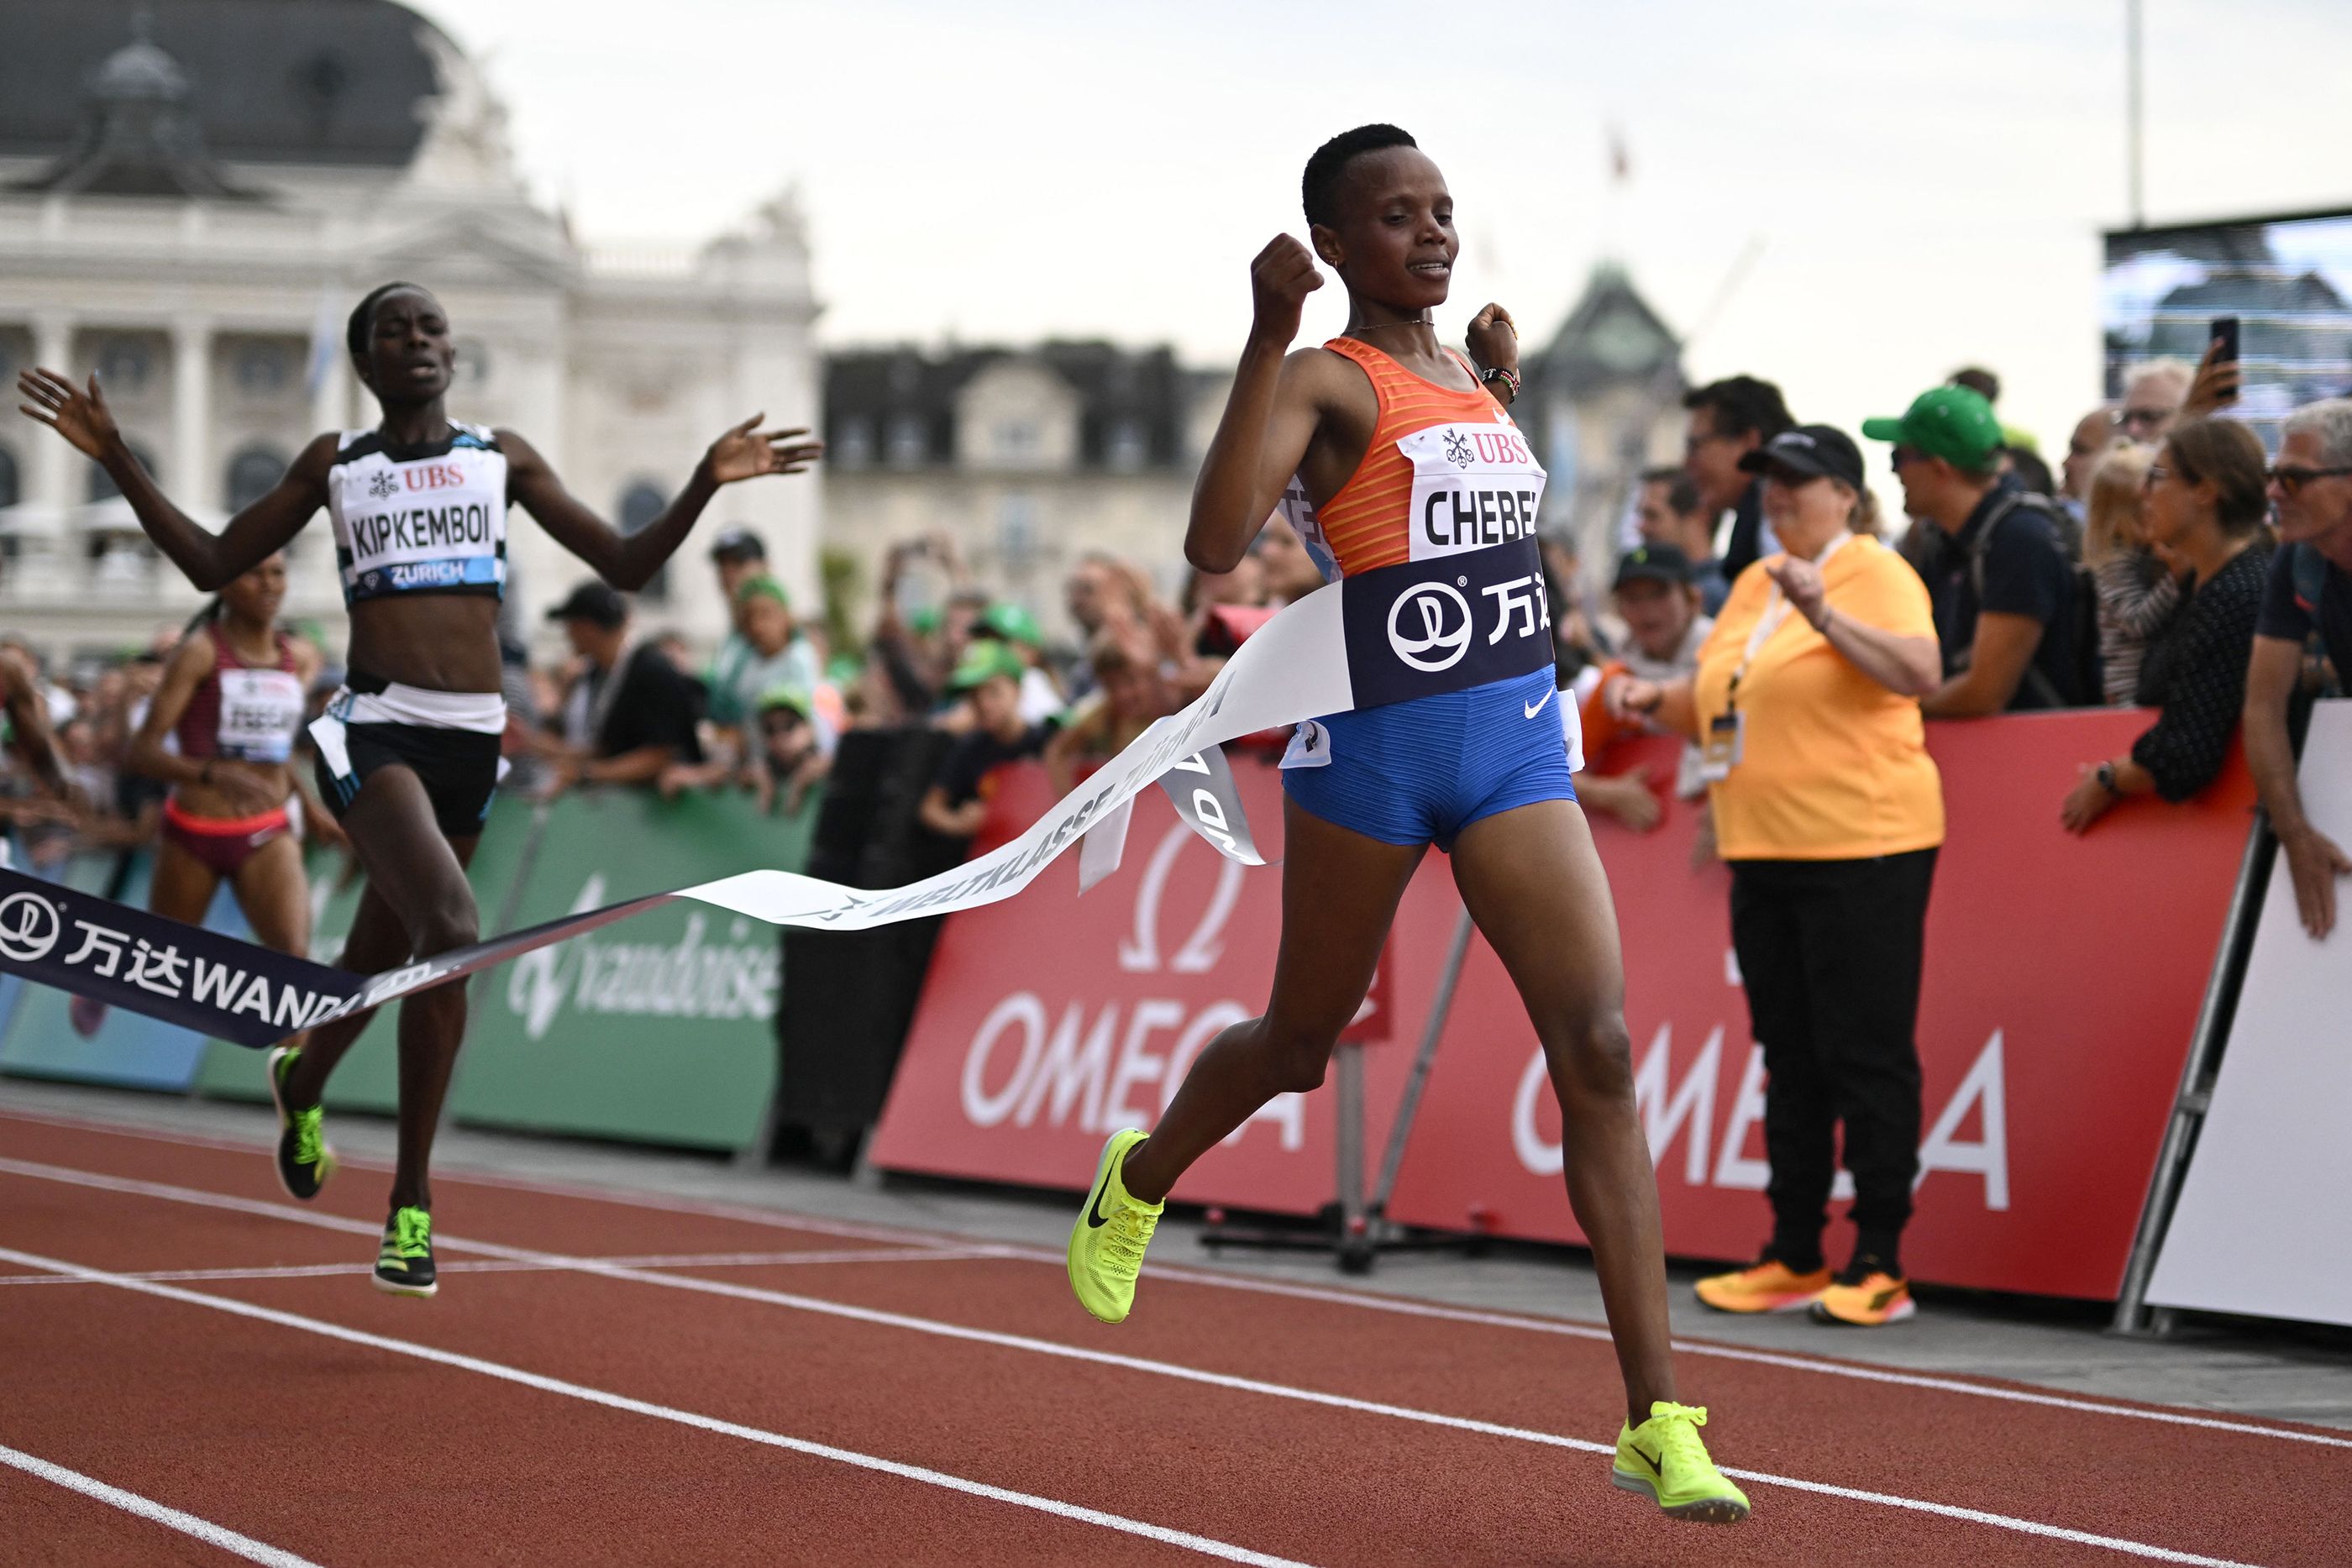 Beatrice Chebet wins the 5000m at the Wanda Diamond League final in Zurich